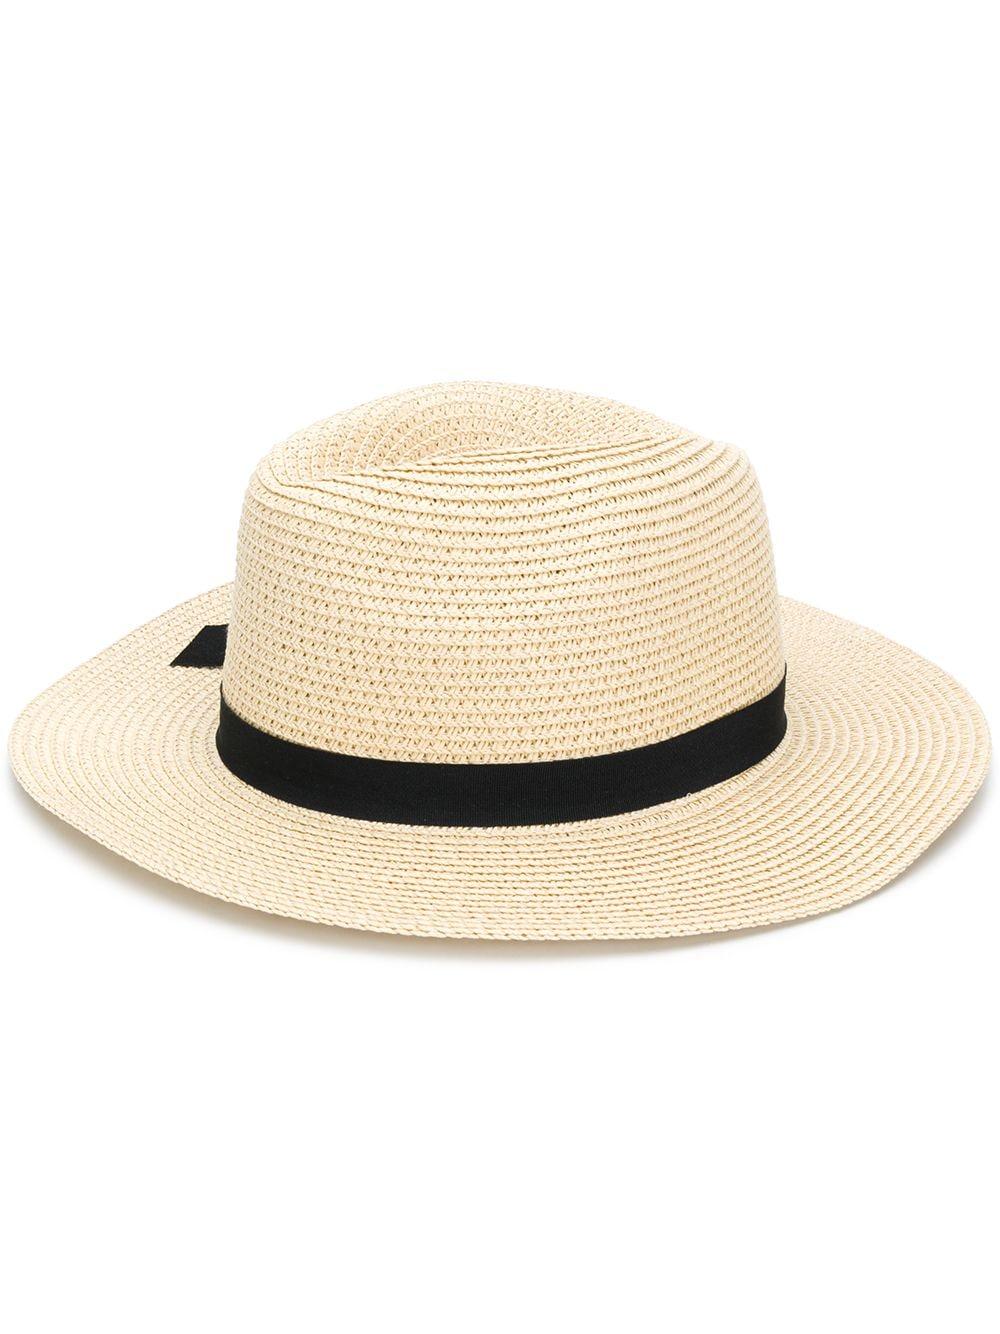 Polo Ralph Lauren Bow-band Straw Hat in Natural - Lyst